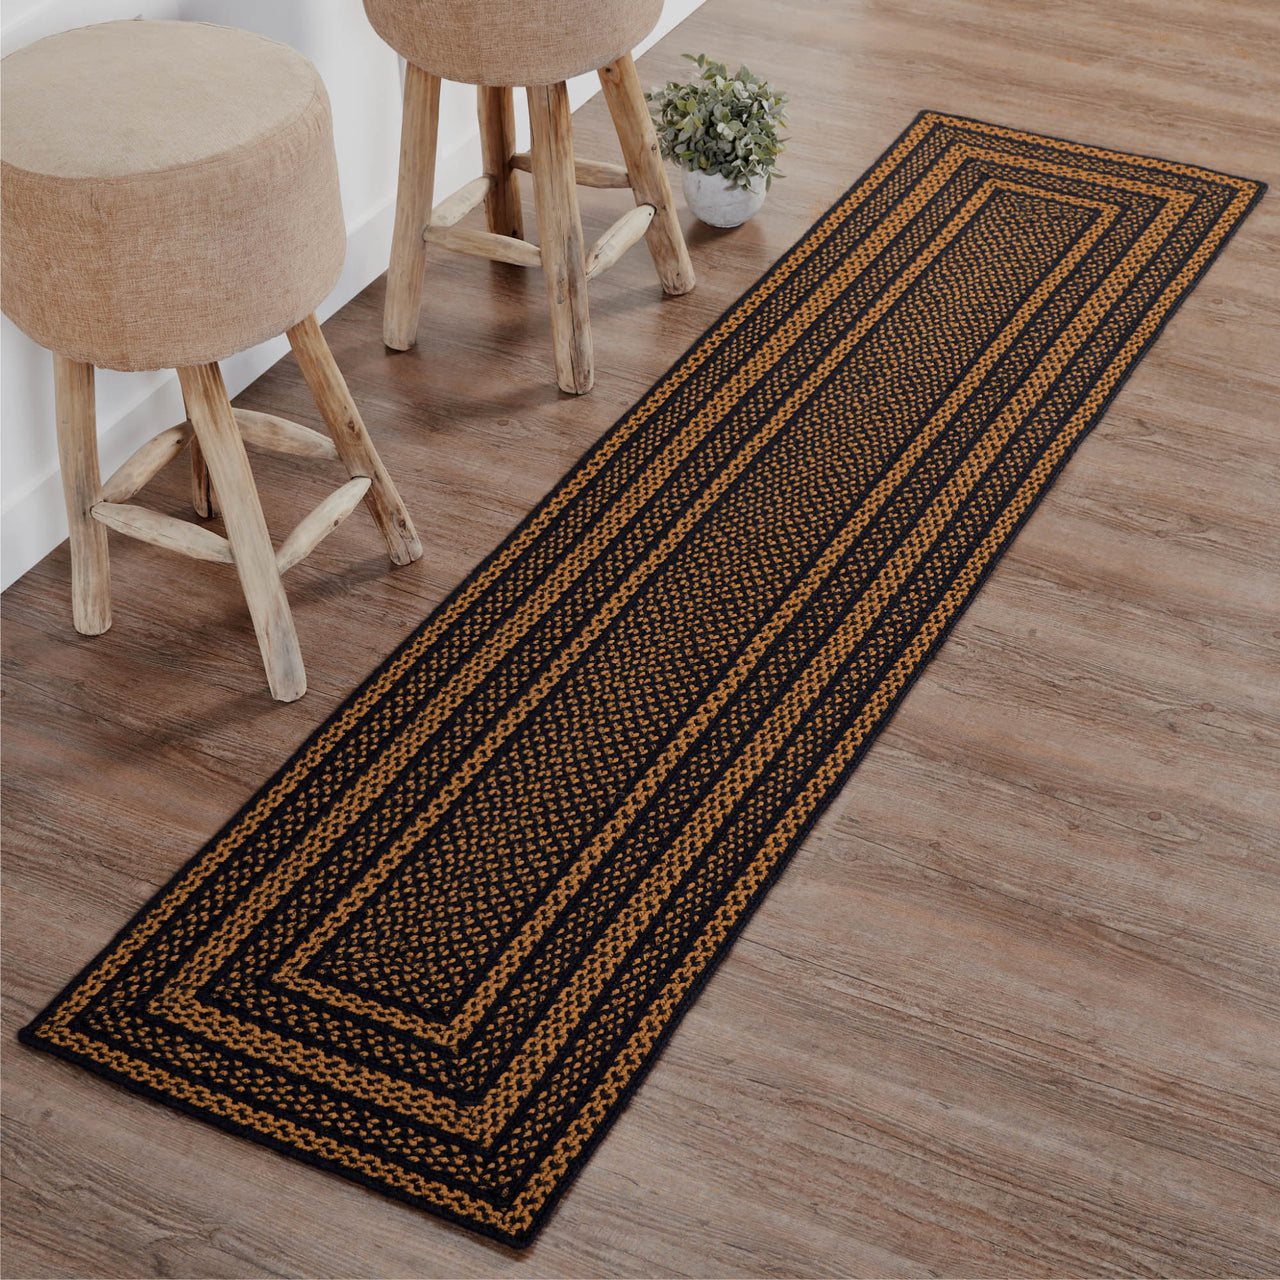 Black & Tan Jute Braided Rug/Runner Rect. with Rug Pad 2'x8' VHC Brands